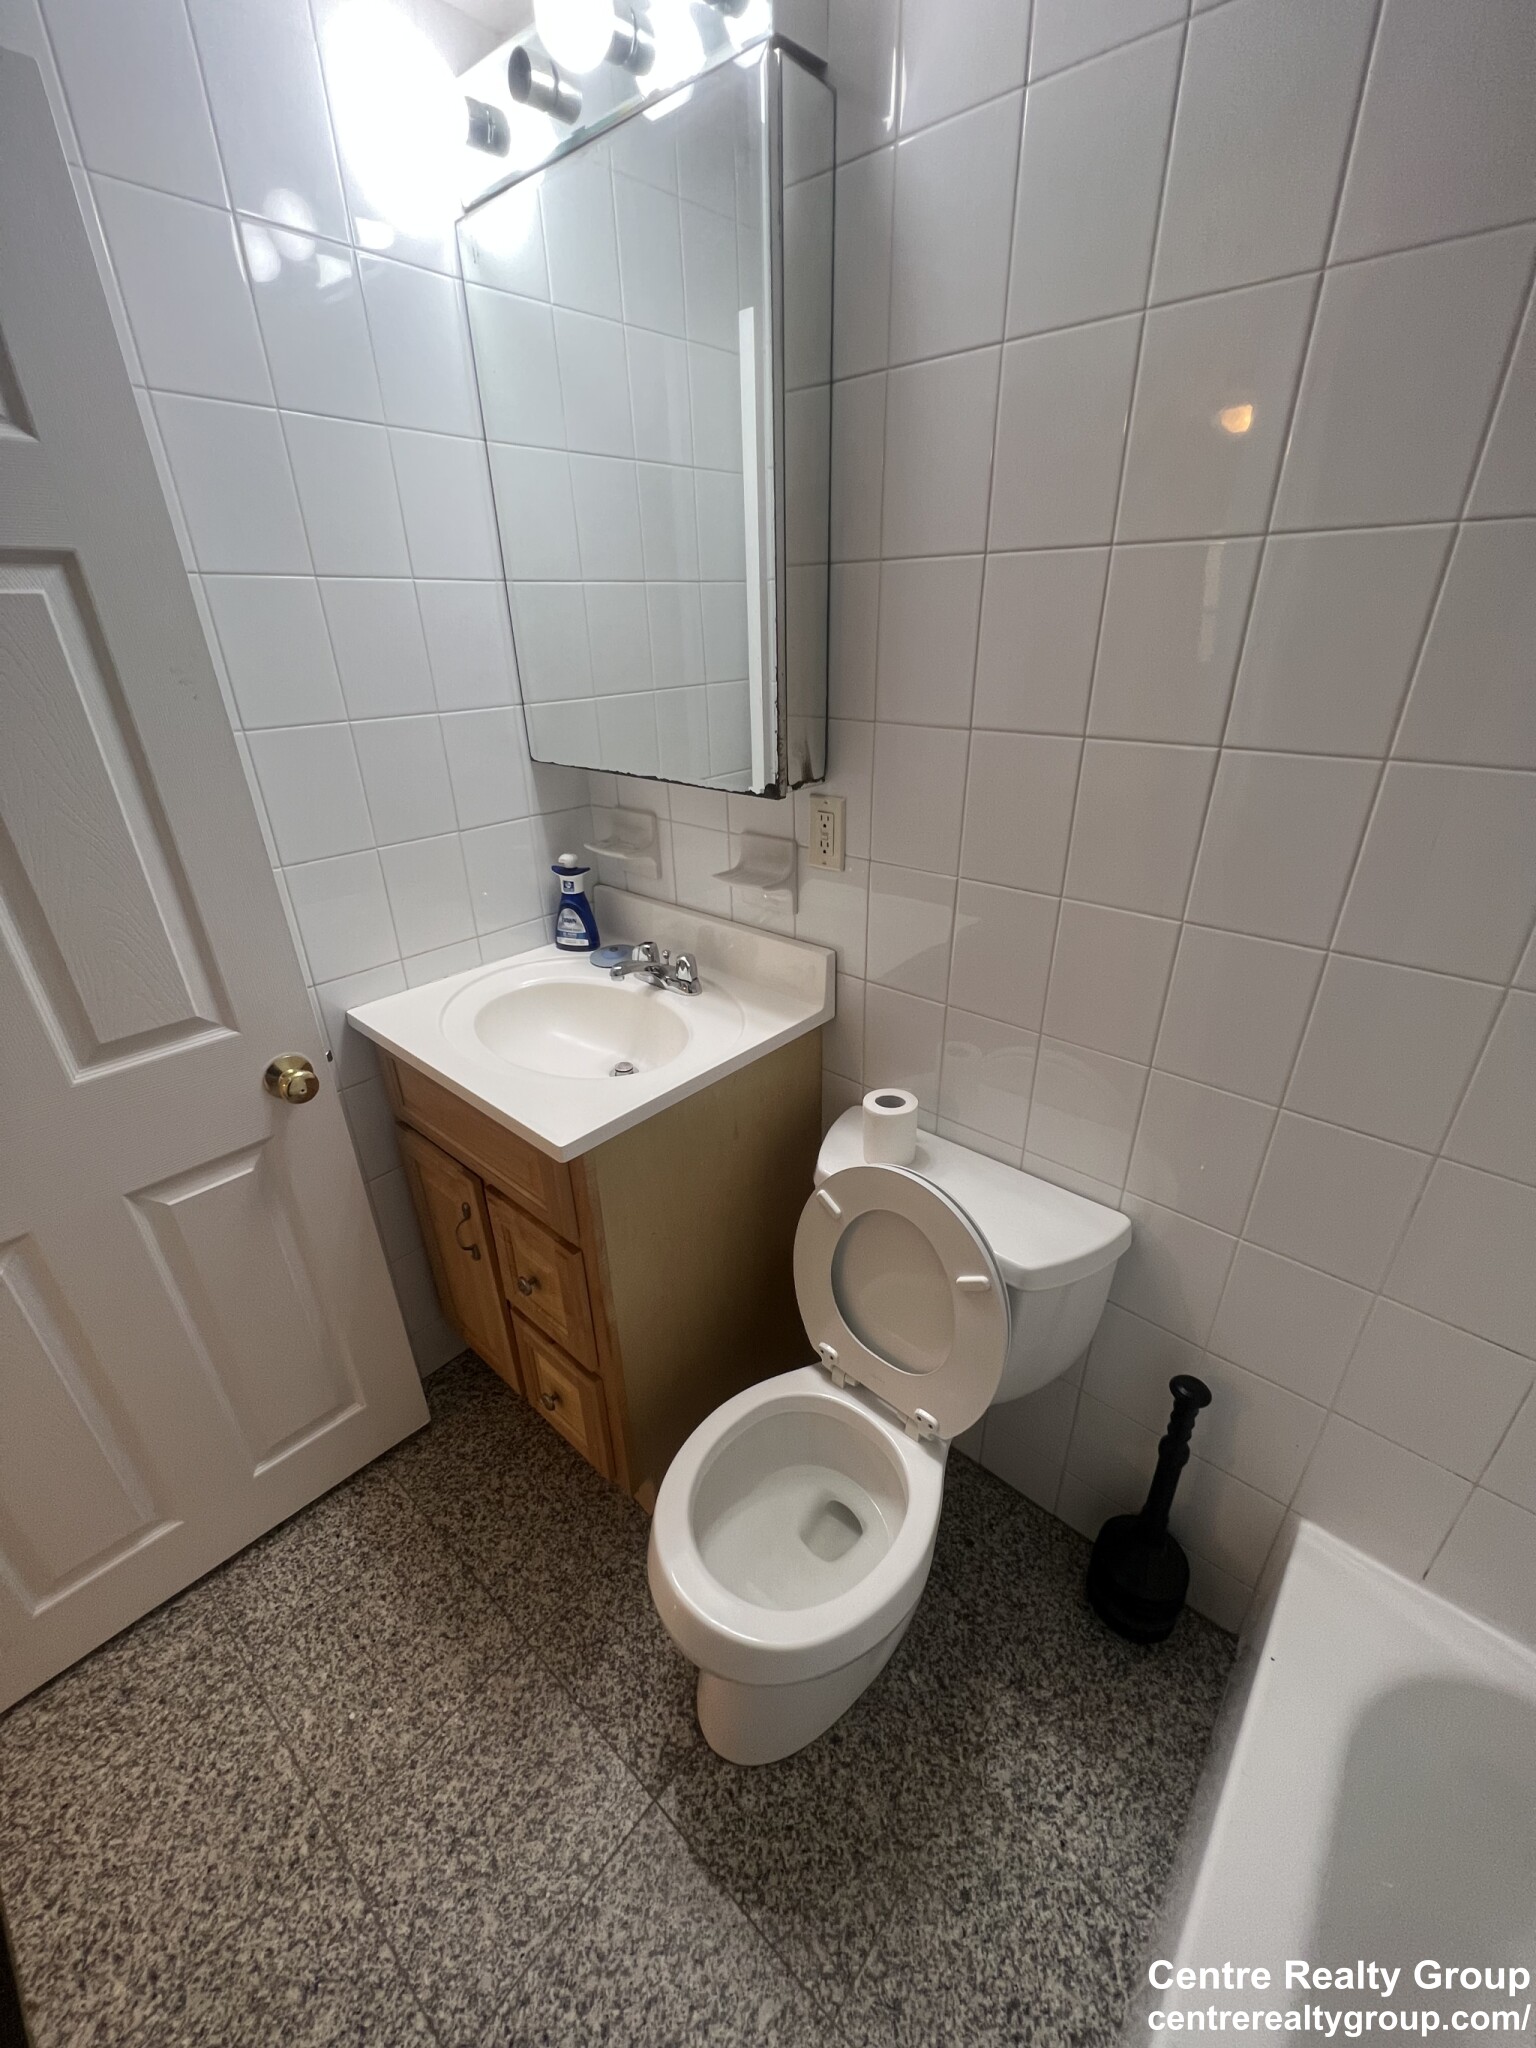 Photos of apartment on Charles,Waltham MA 02453